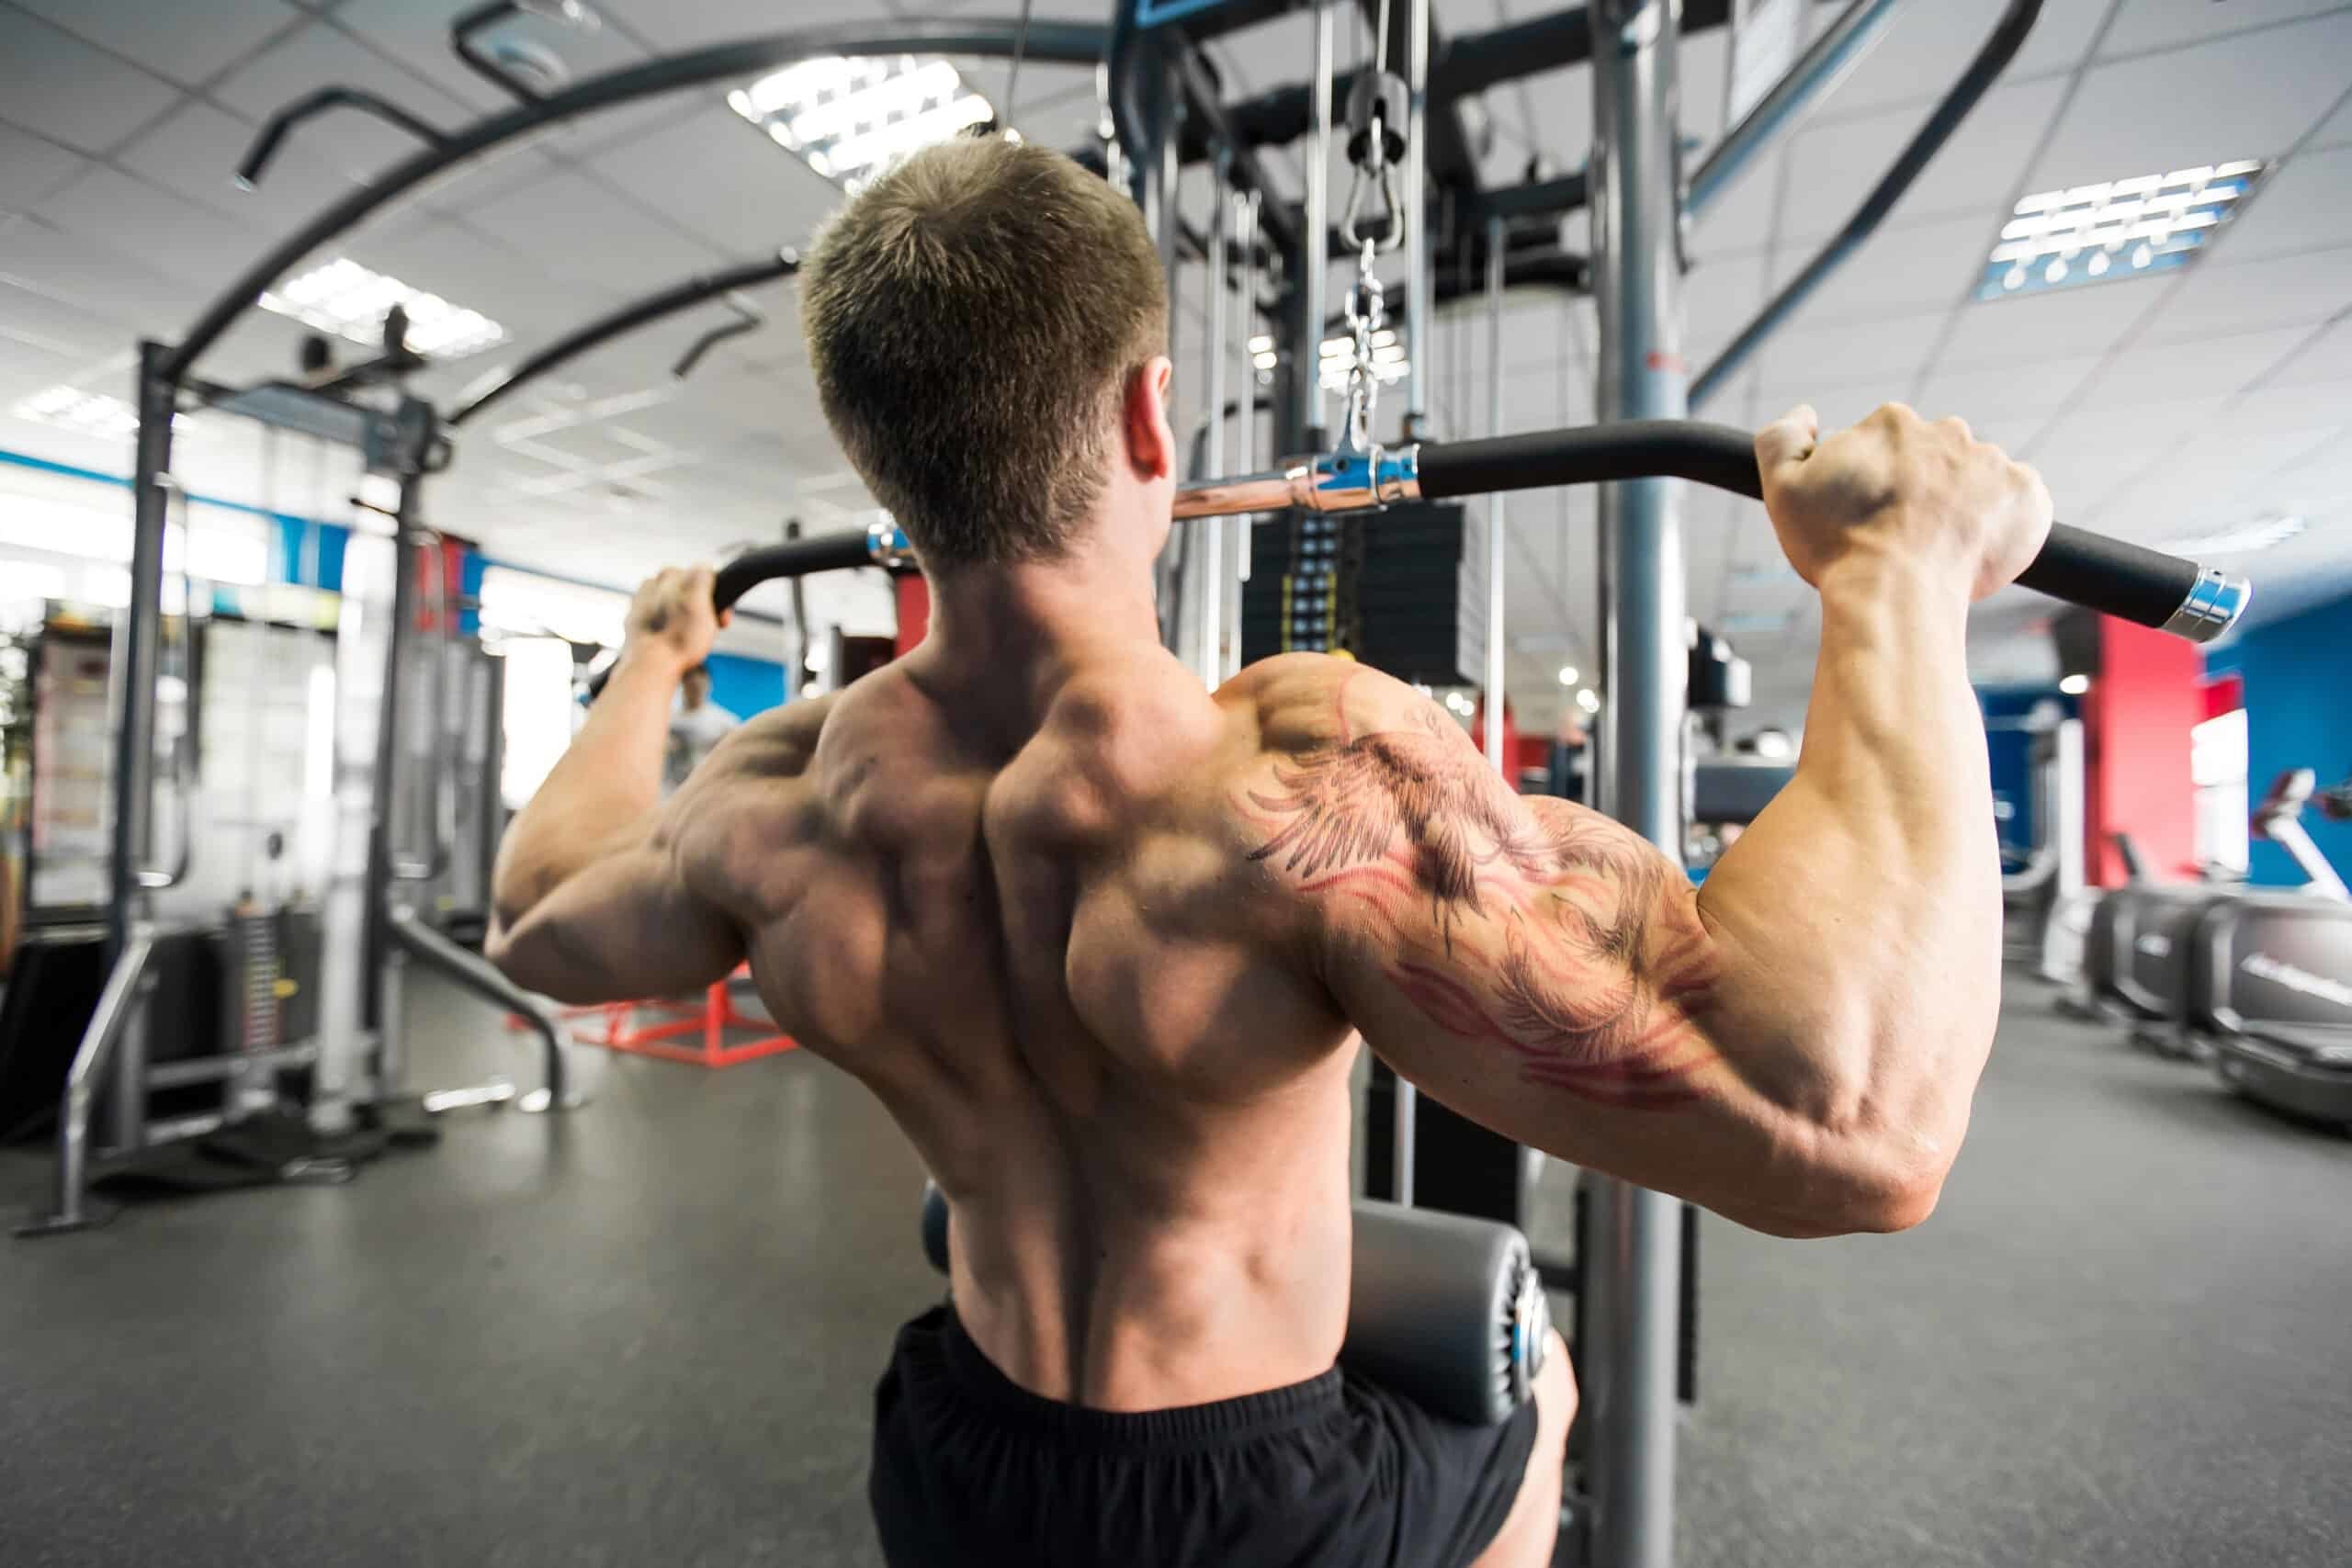 3 Ways to Work Your Back and Arms With the Lat Pull Machine